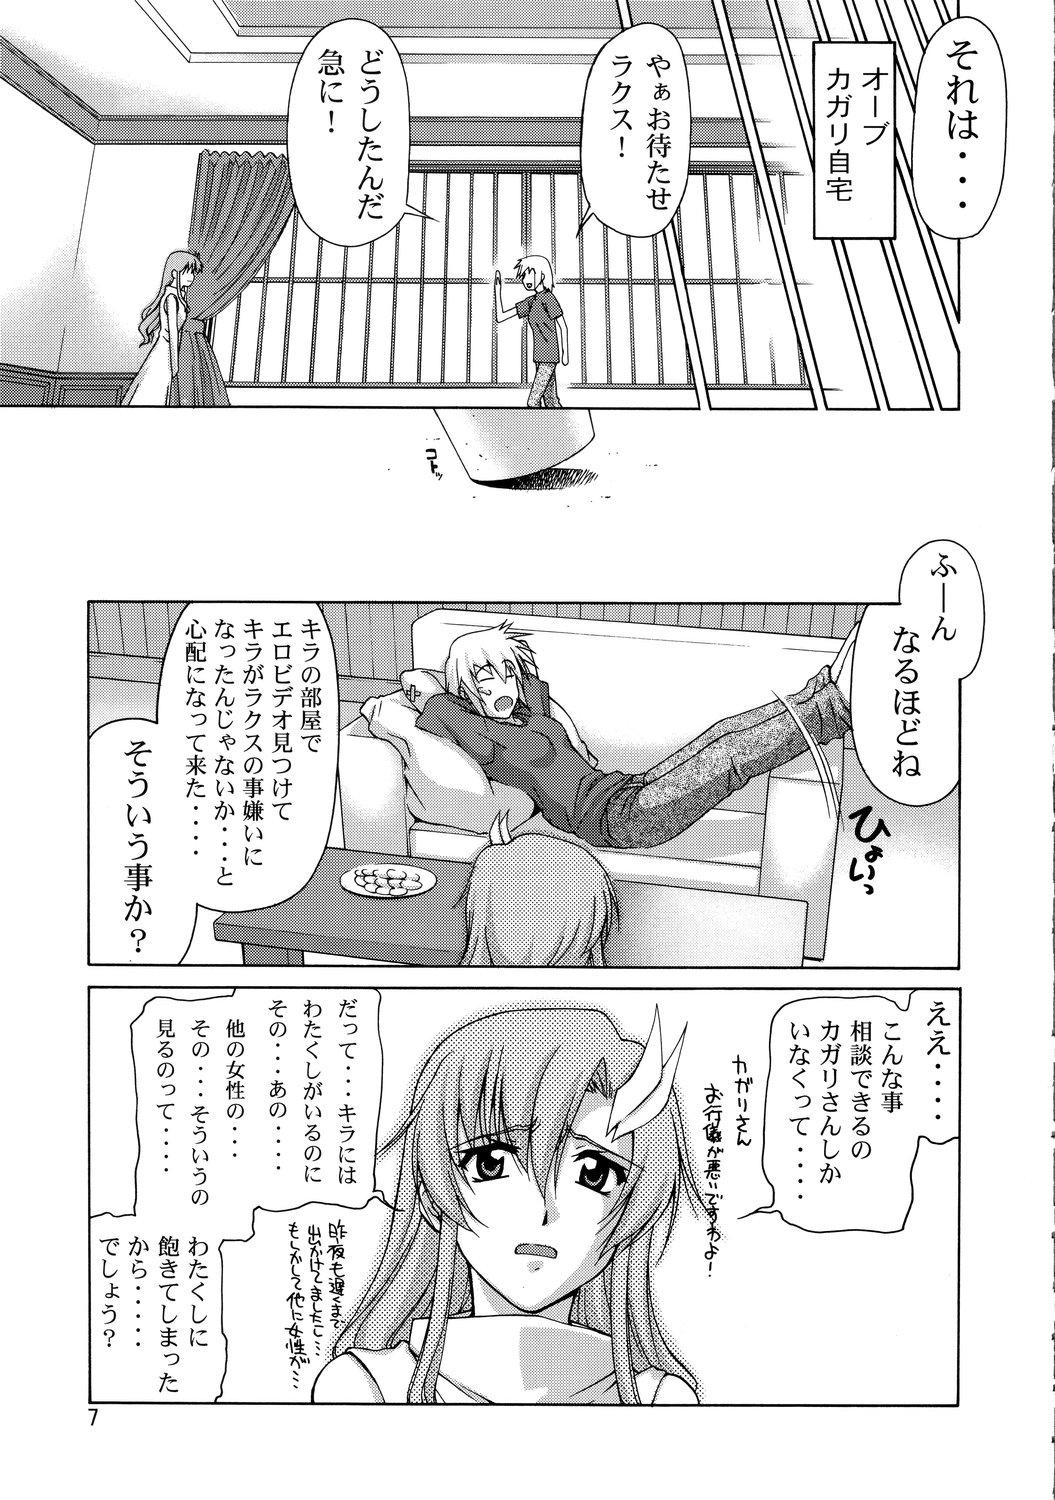 Bigtits A Diva of Healing - Gundam seed destiny Penetration - Page 6